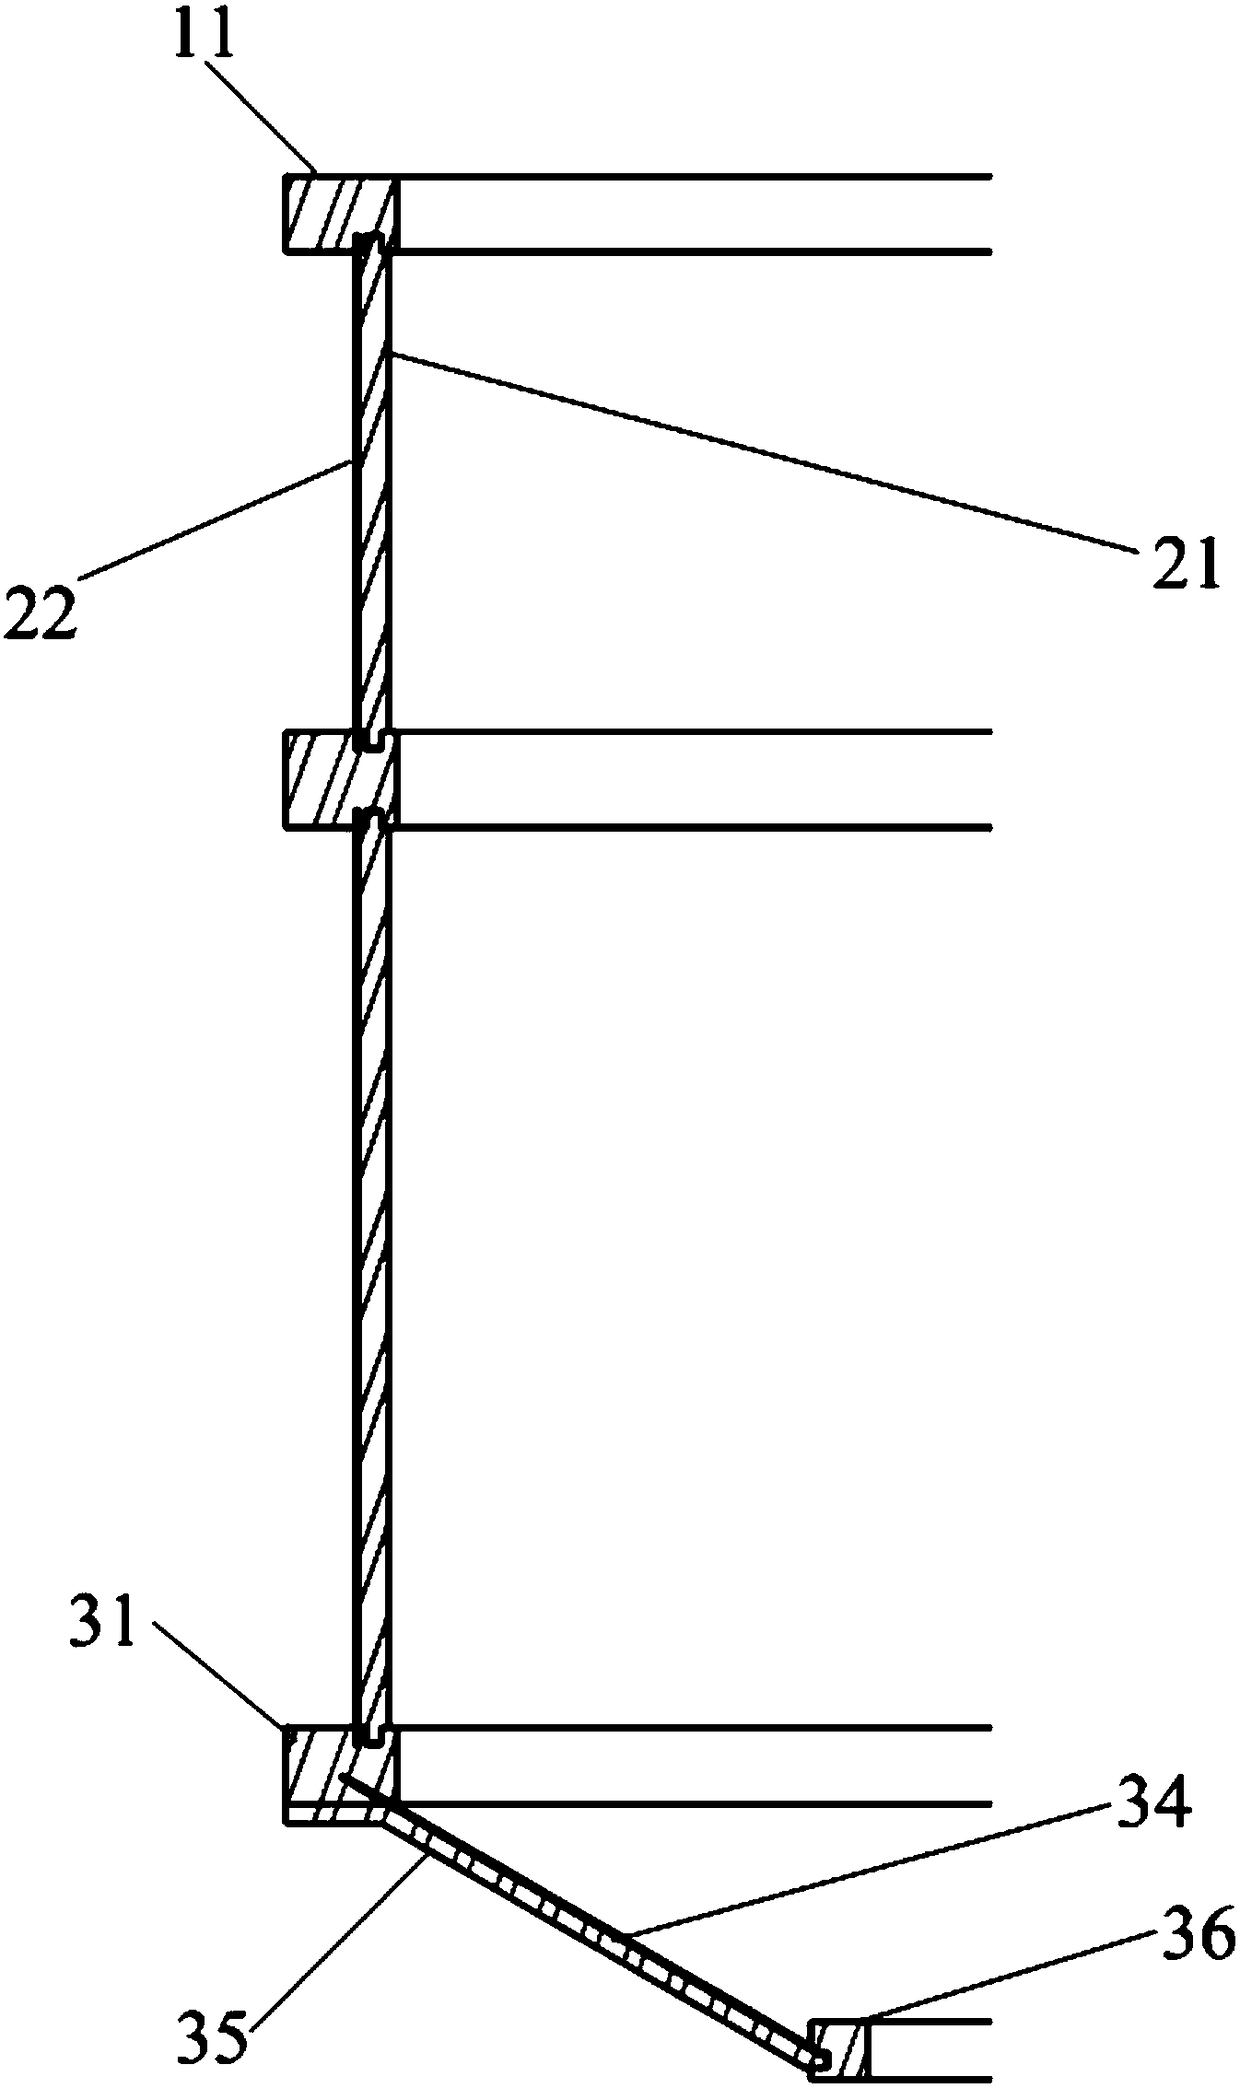 Draft tube as well as making method and material thereof